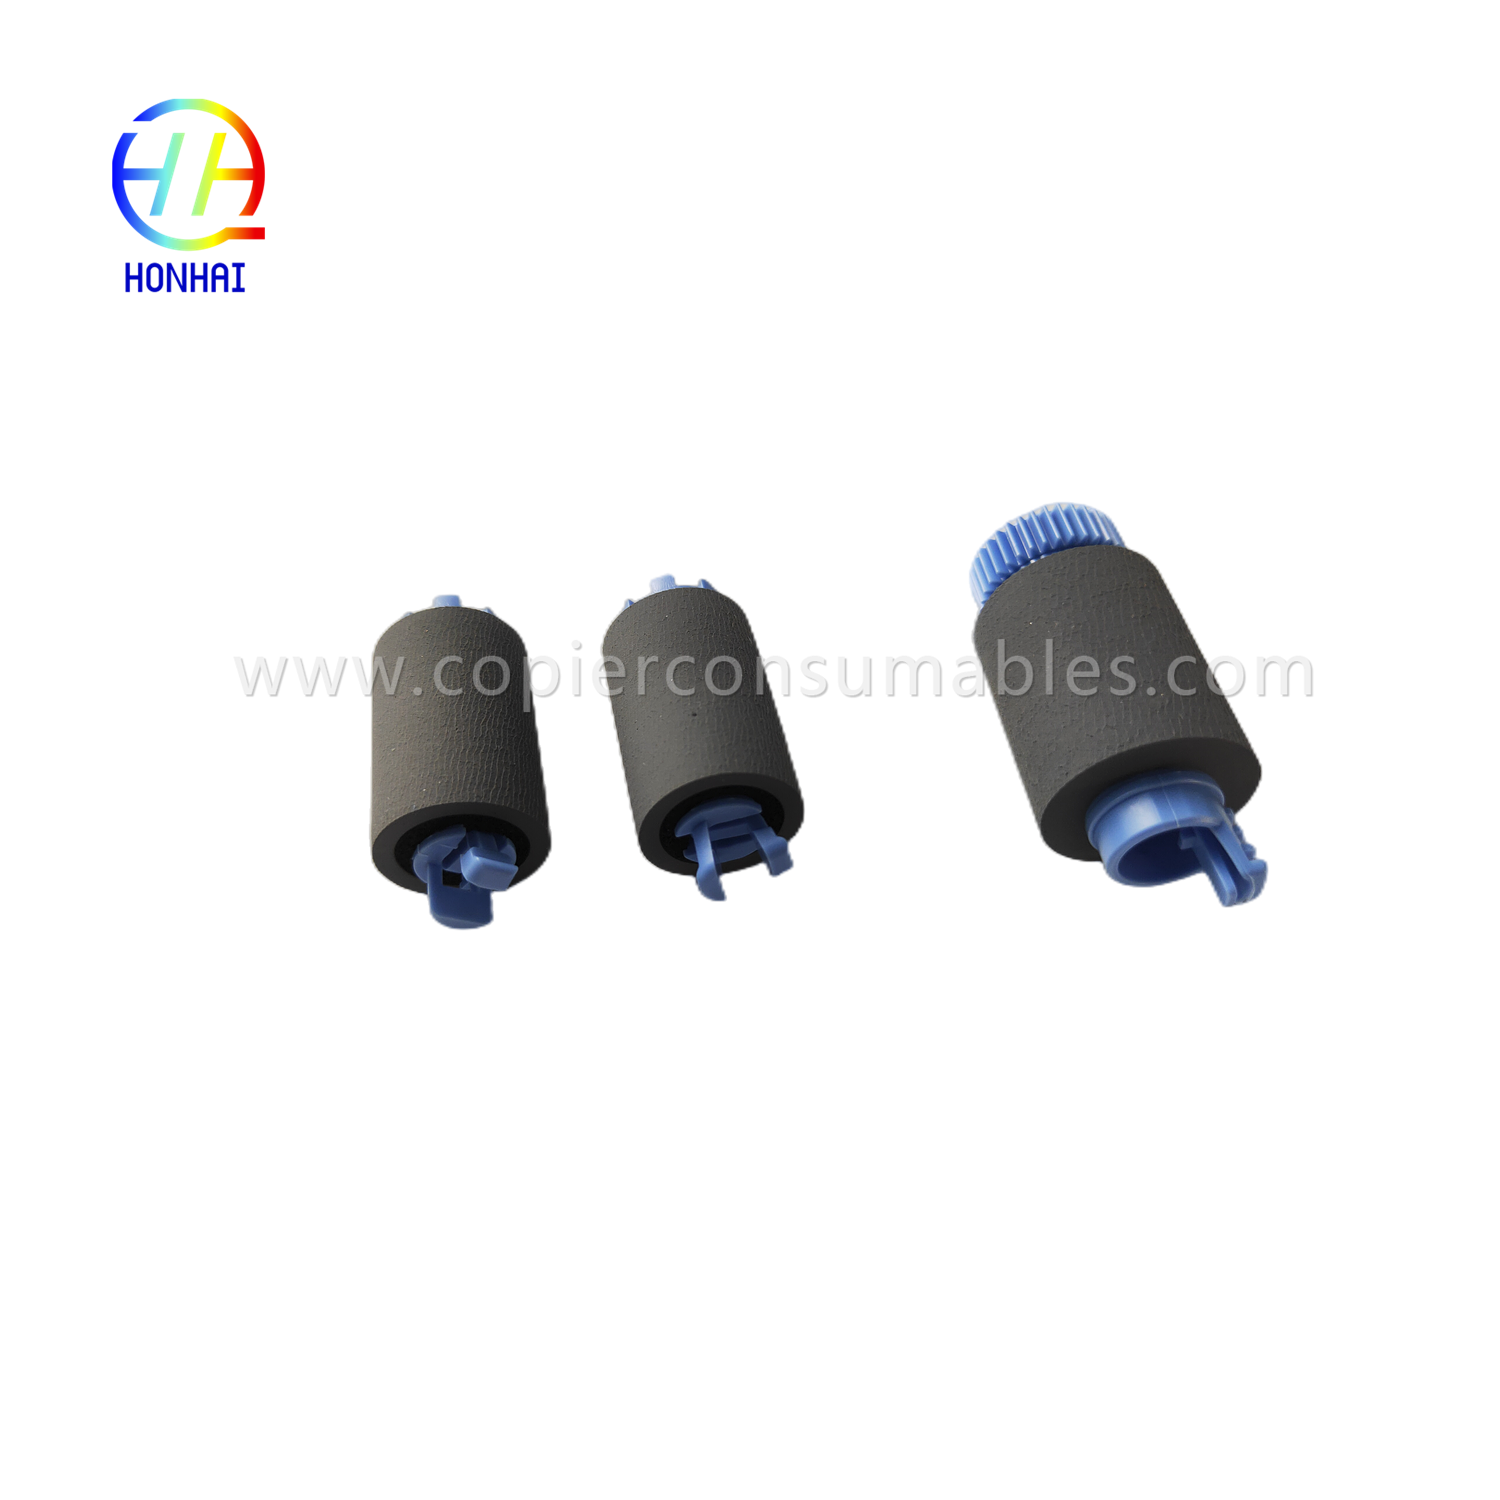 https://c585.goodao.net/tray-2-5-pickup-feed-separation-roller-set-for-hp-a7w93-67082-mfp-785f-780dn-e77650z-e77660z-e77650dn-dn-d076776 p77750z-p77760z-p75050dn-p75050dw-product/